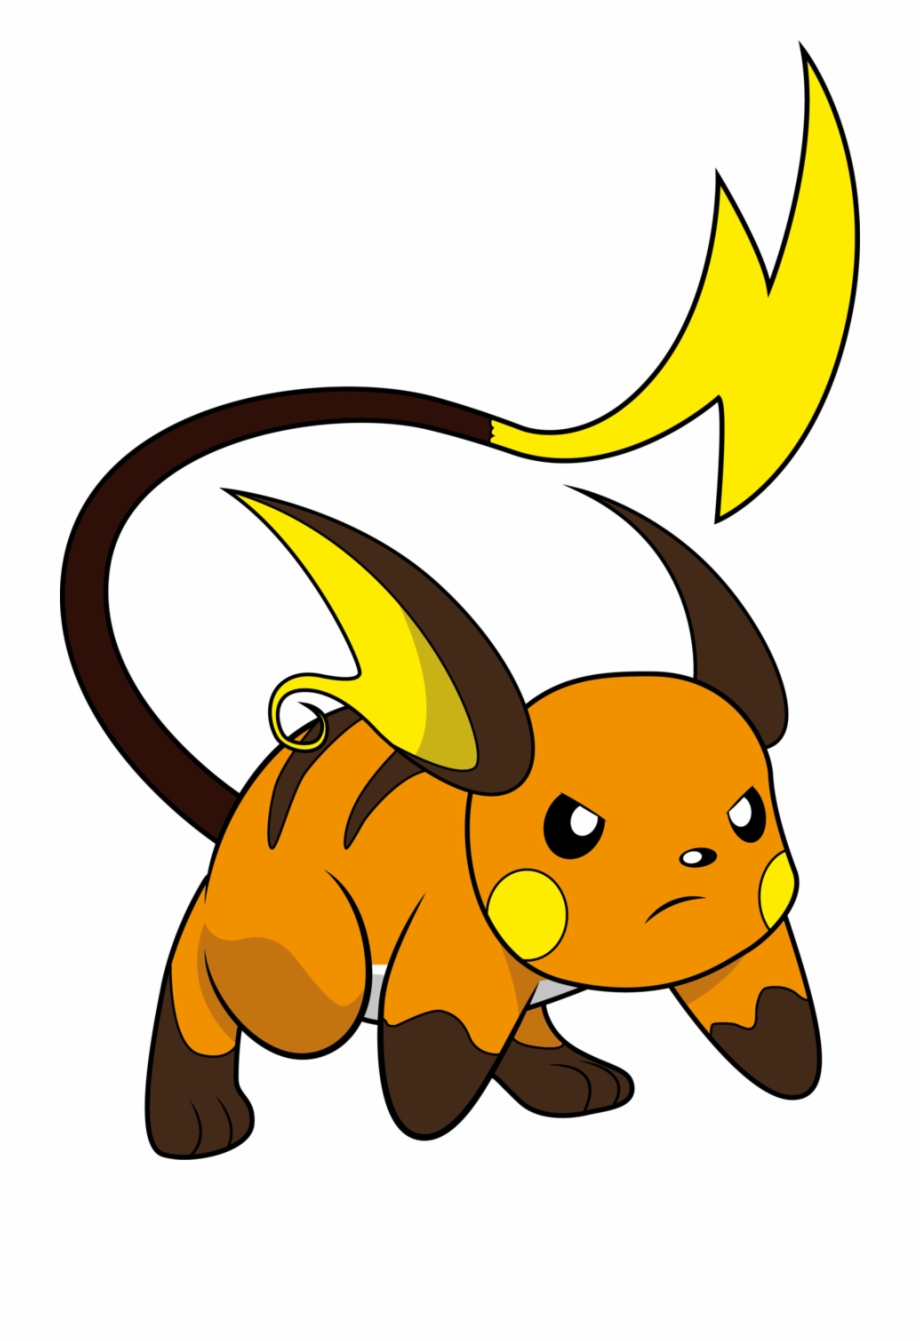 Raichu Is Often Used As A Lead, And Can Help Severely.